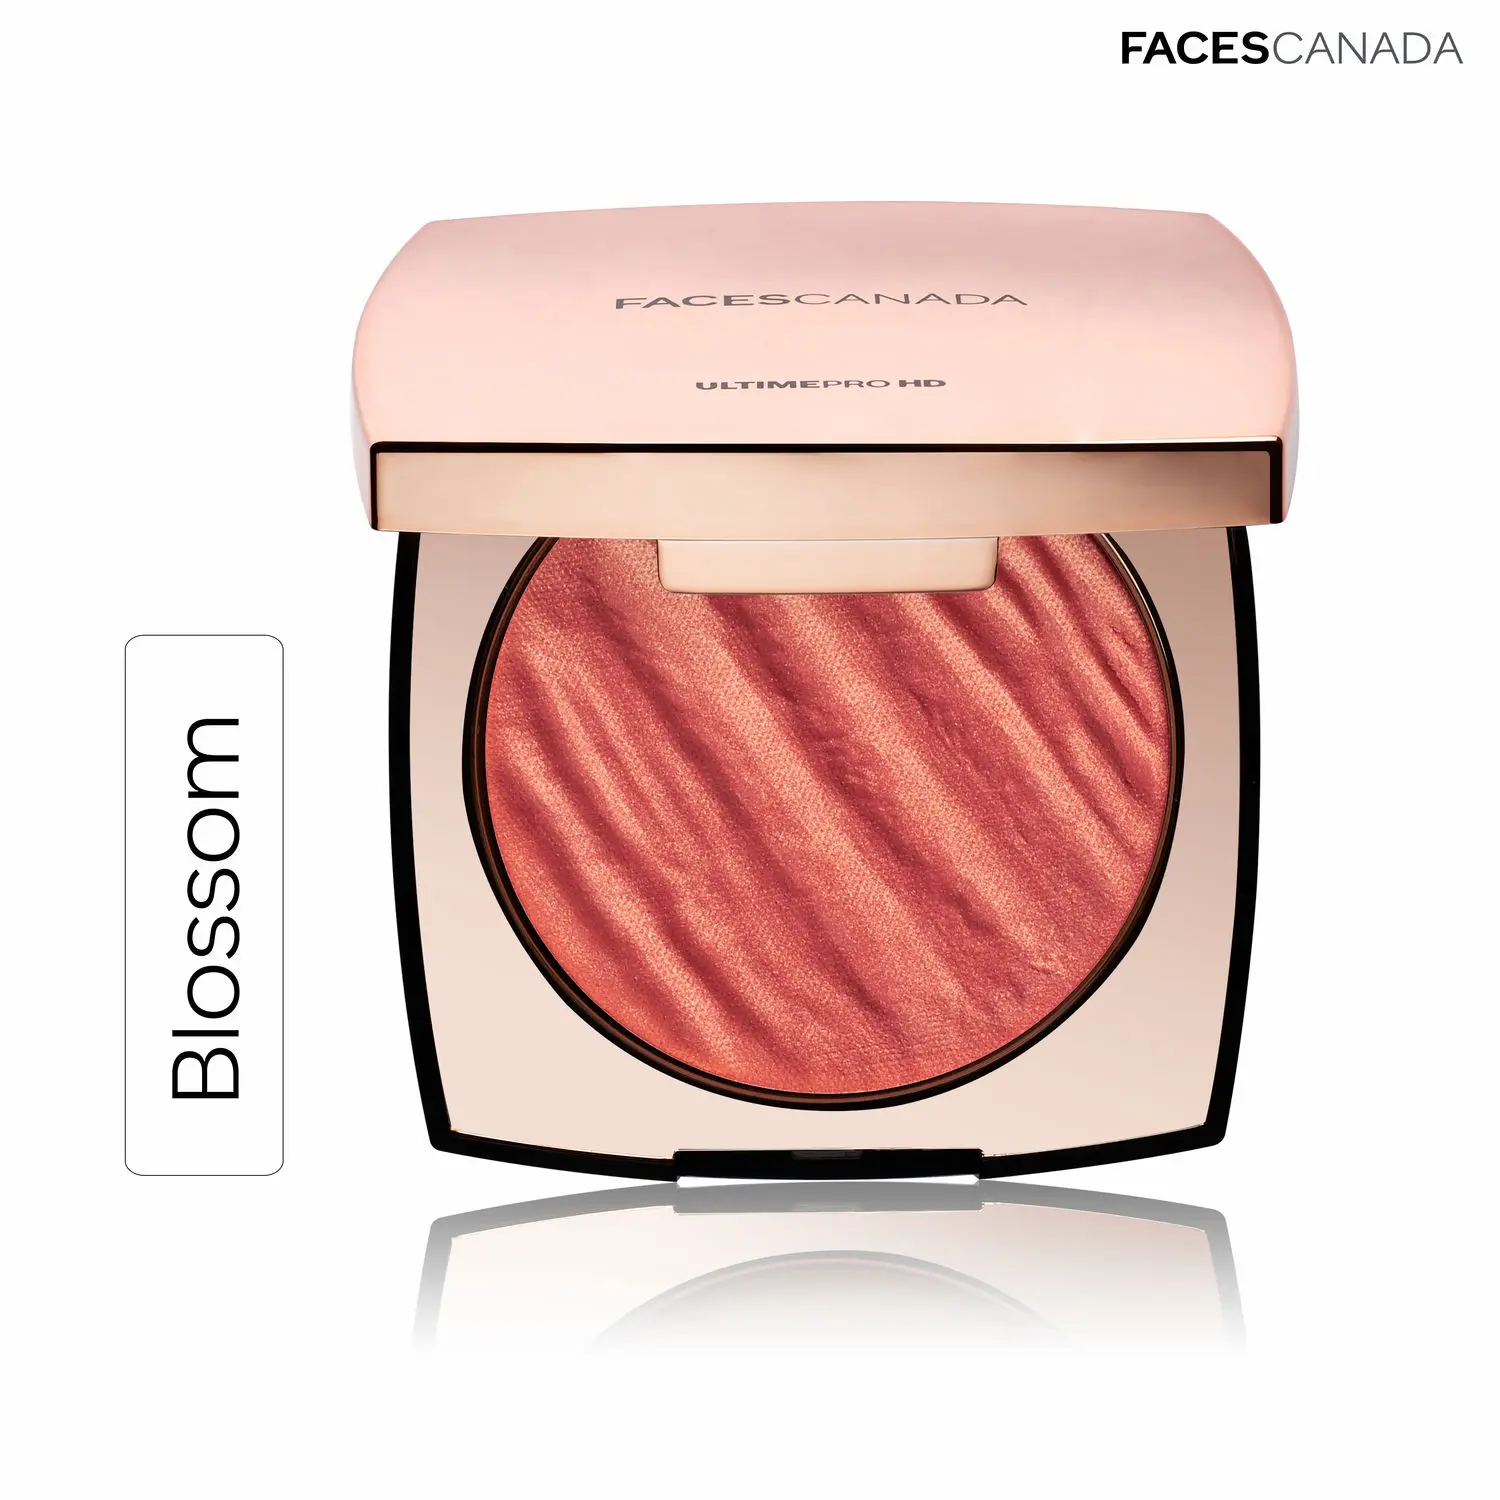 Faces Canada Ultime Pro HD Lights Camera Blush - Blossom 01 (6 g)